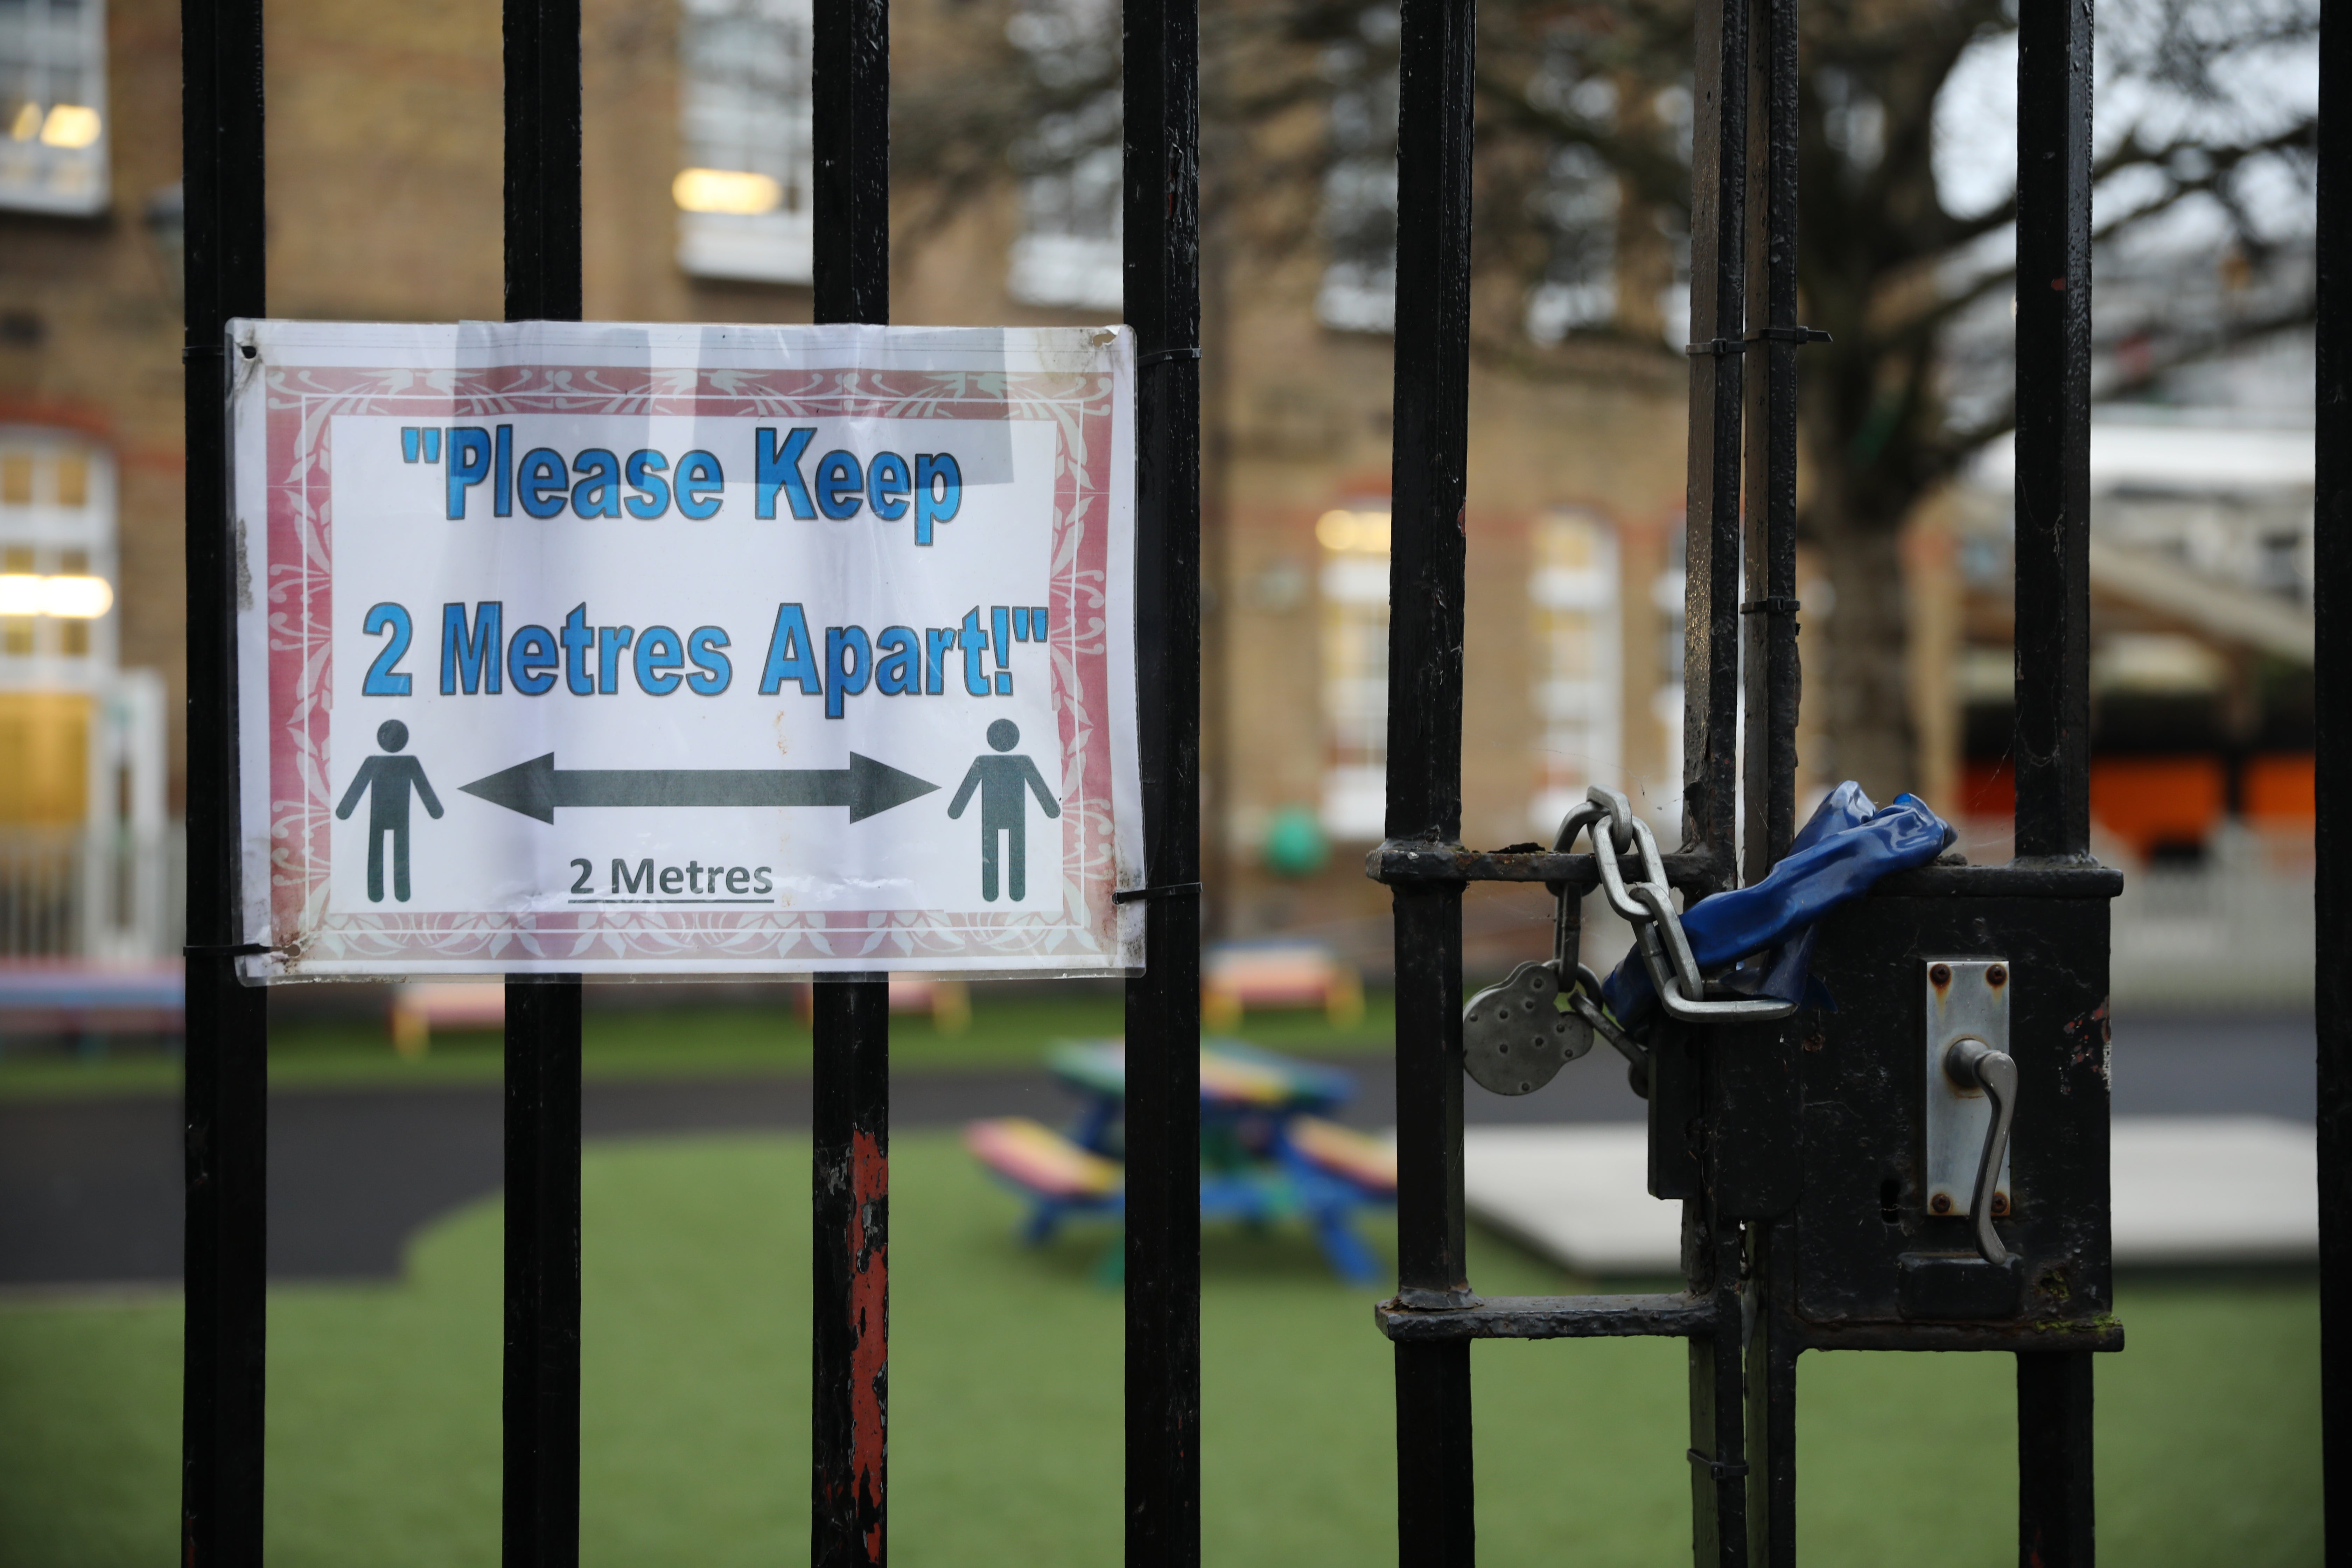 Boris Johnson is expected to announce all children will be allowed to return to school on 8 March